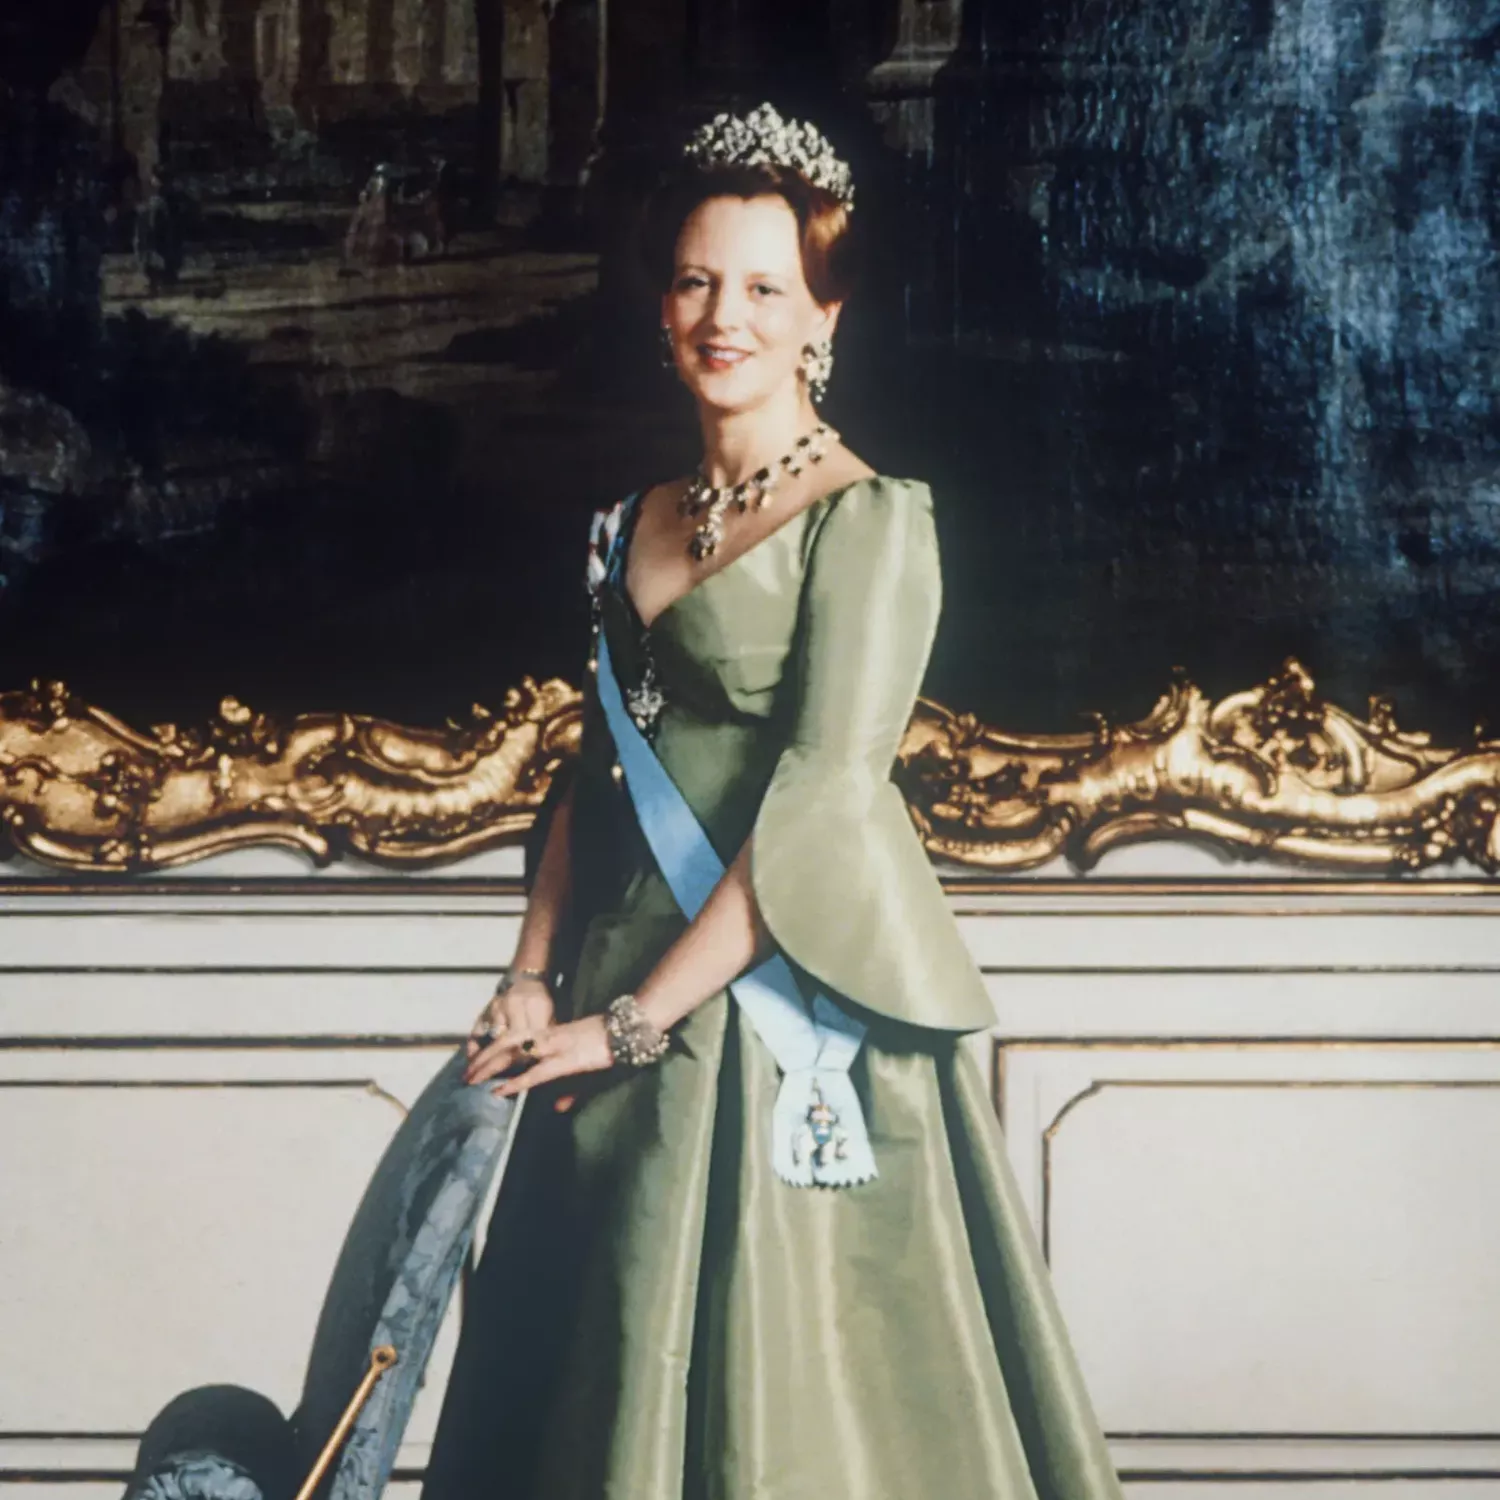 Queen Margrethe wearing some of her favourite emeralds while celebrating her 40th birthday, 16 June 1980